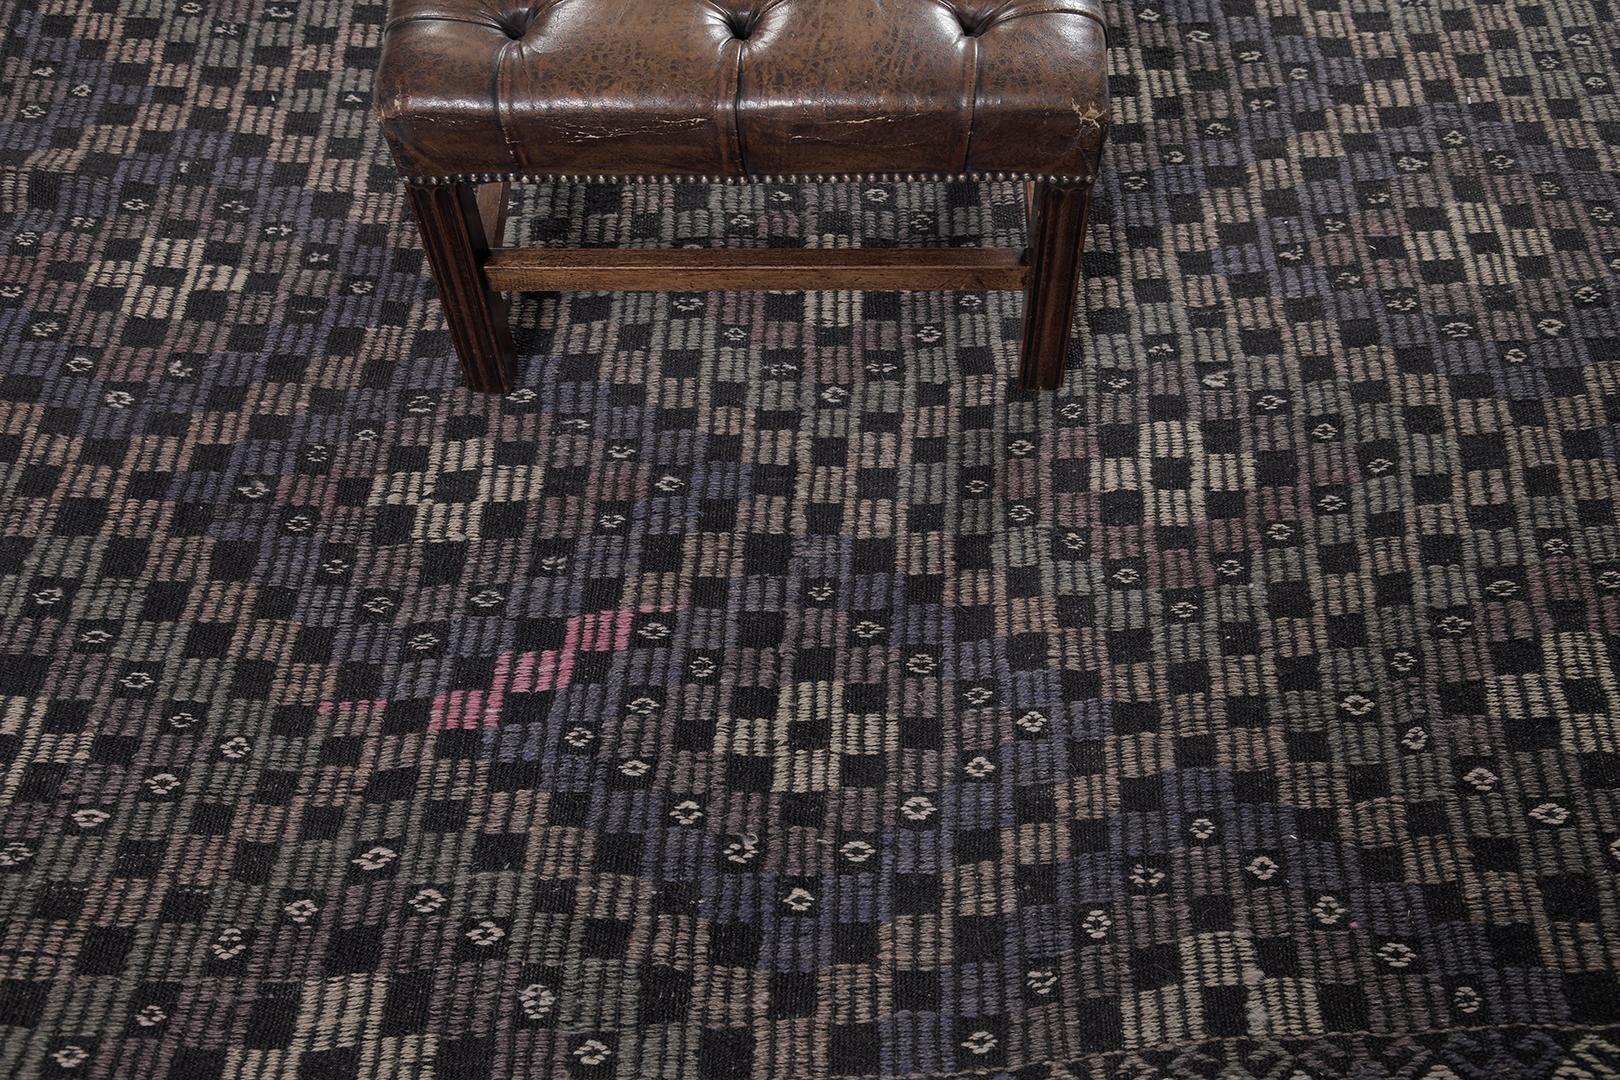 
An exquisite Vintage Turkish Anatolian Jejim Kilim that features a stack of lozenges that creates a beguiling effect to viewer’s eyes. Brilliantly composed, this compelling rug comprises linear and checkered elements forming a gorgeous cohesive